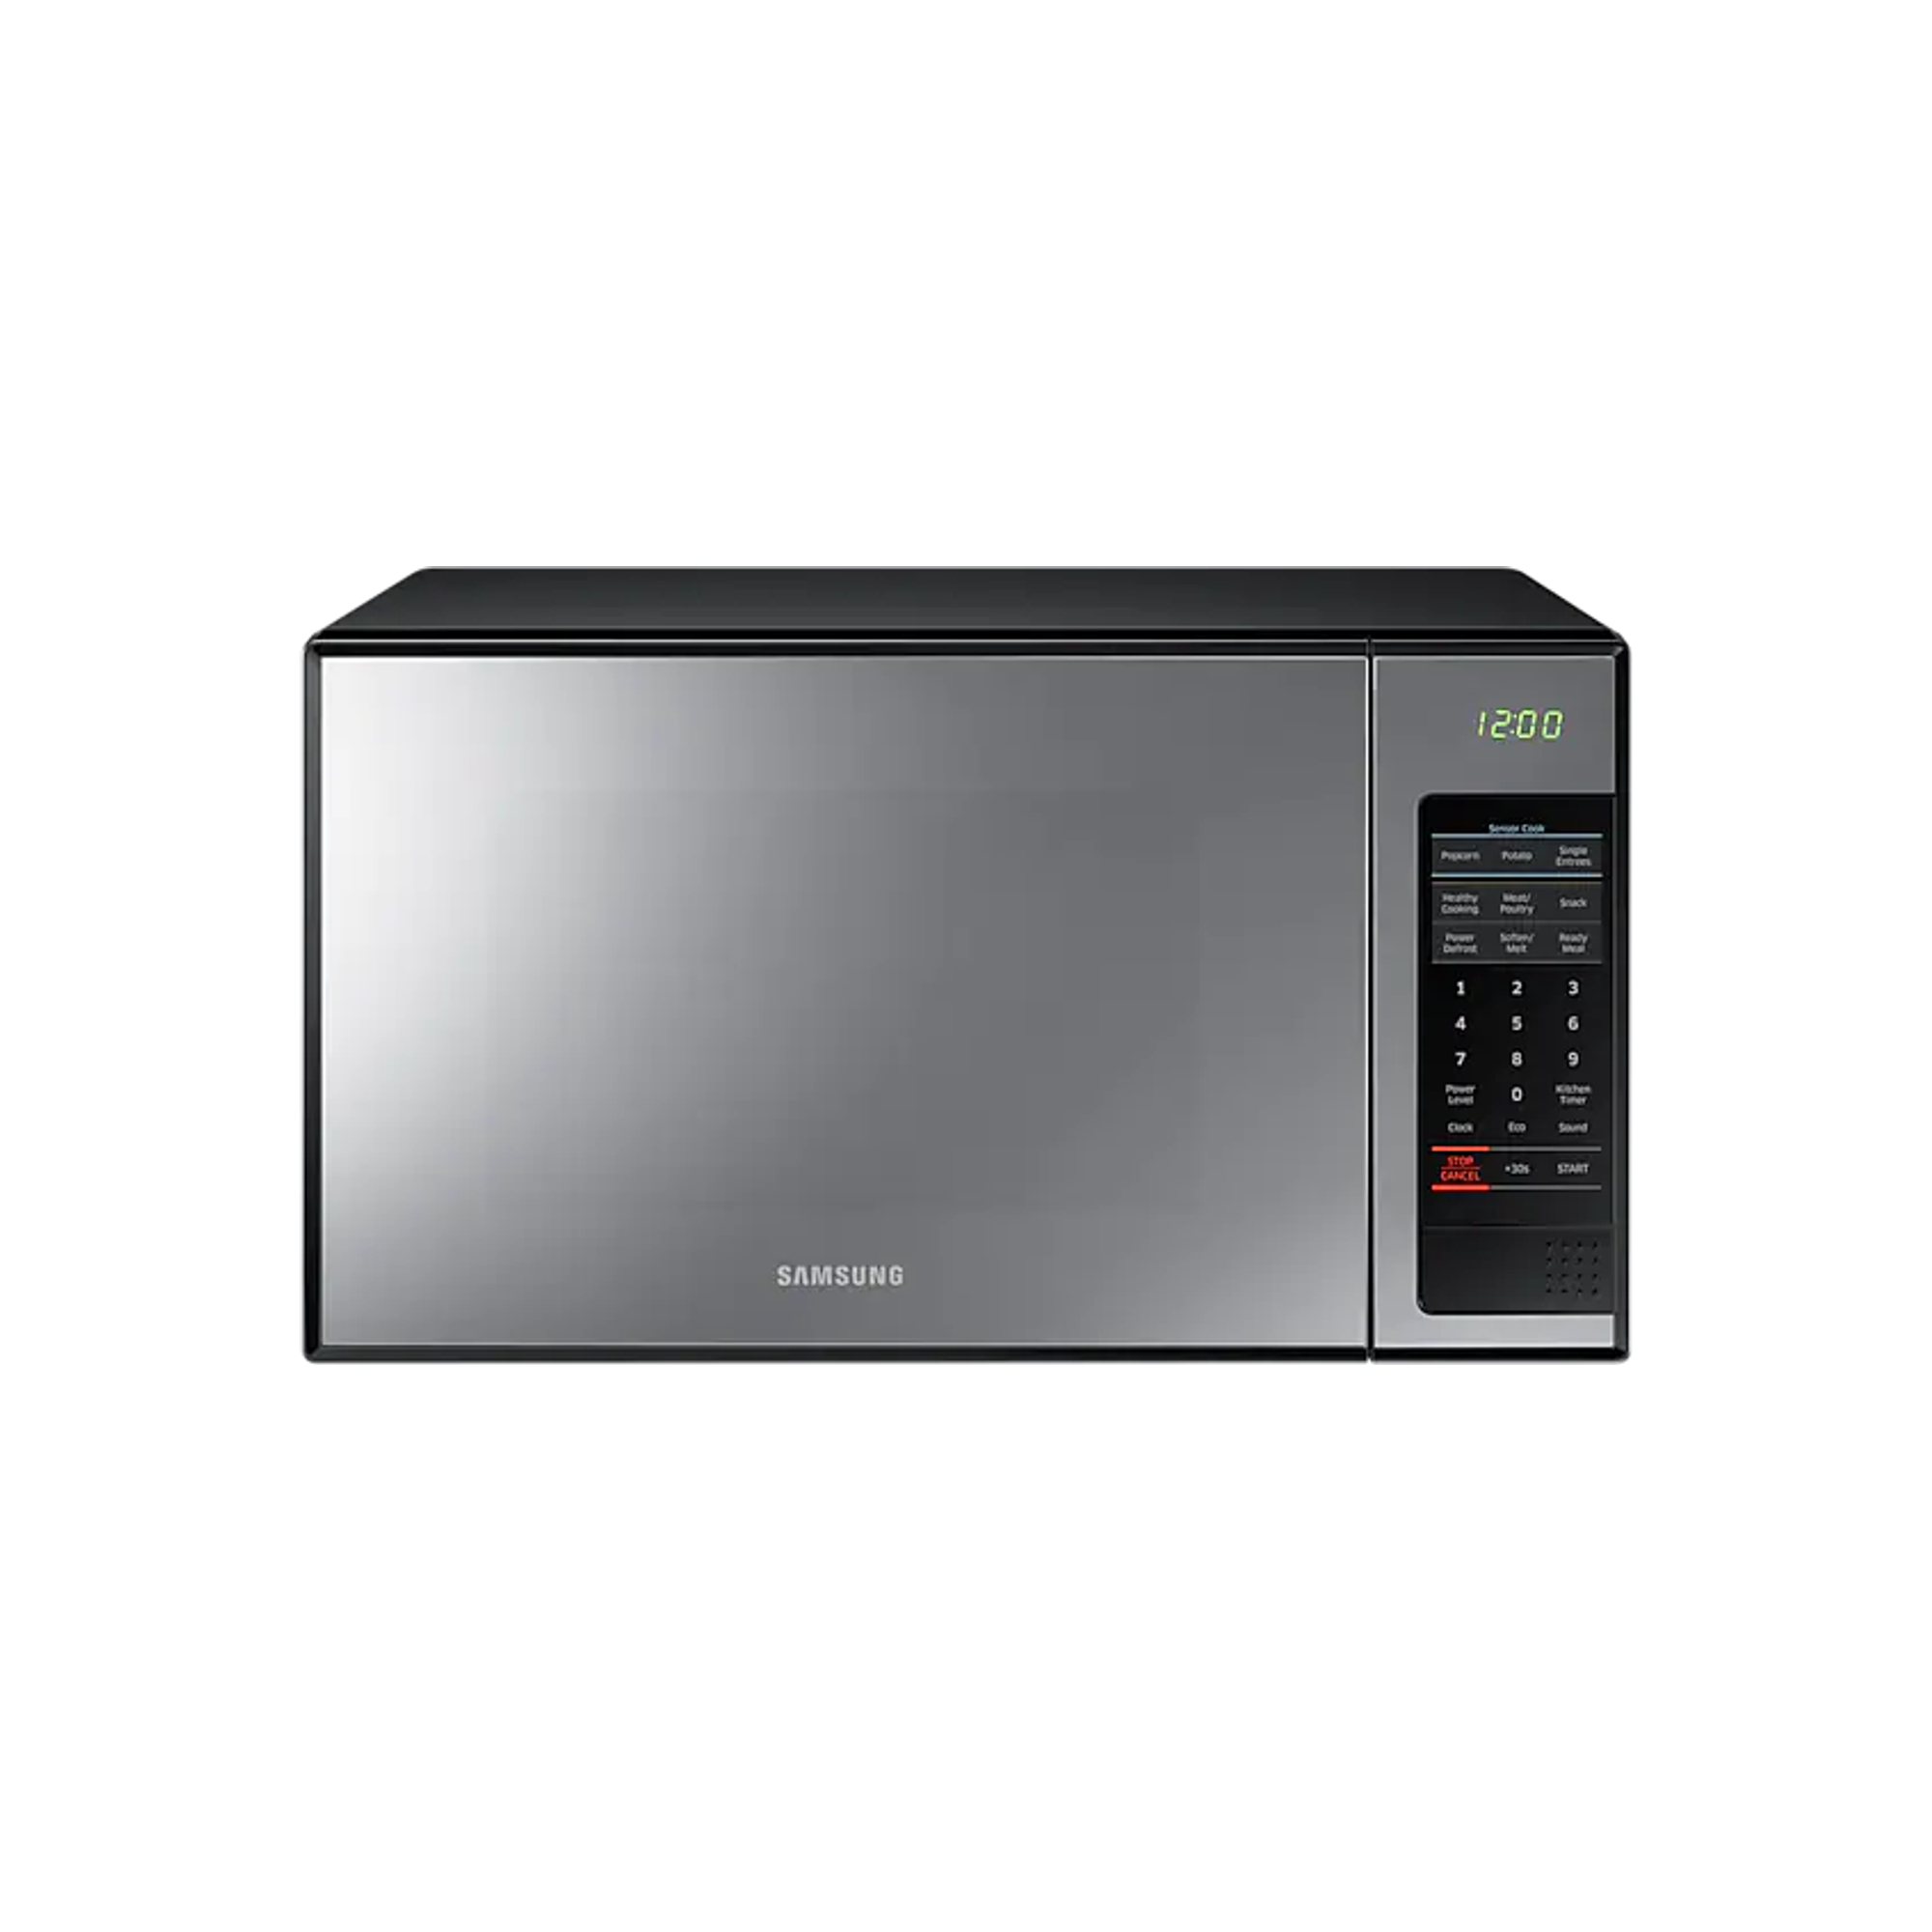 Samsung 32L Solo Microwave Mirror + Free Galaxy Fit 3